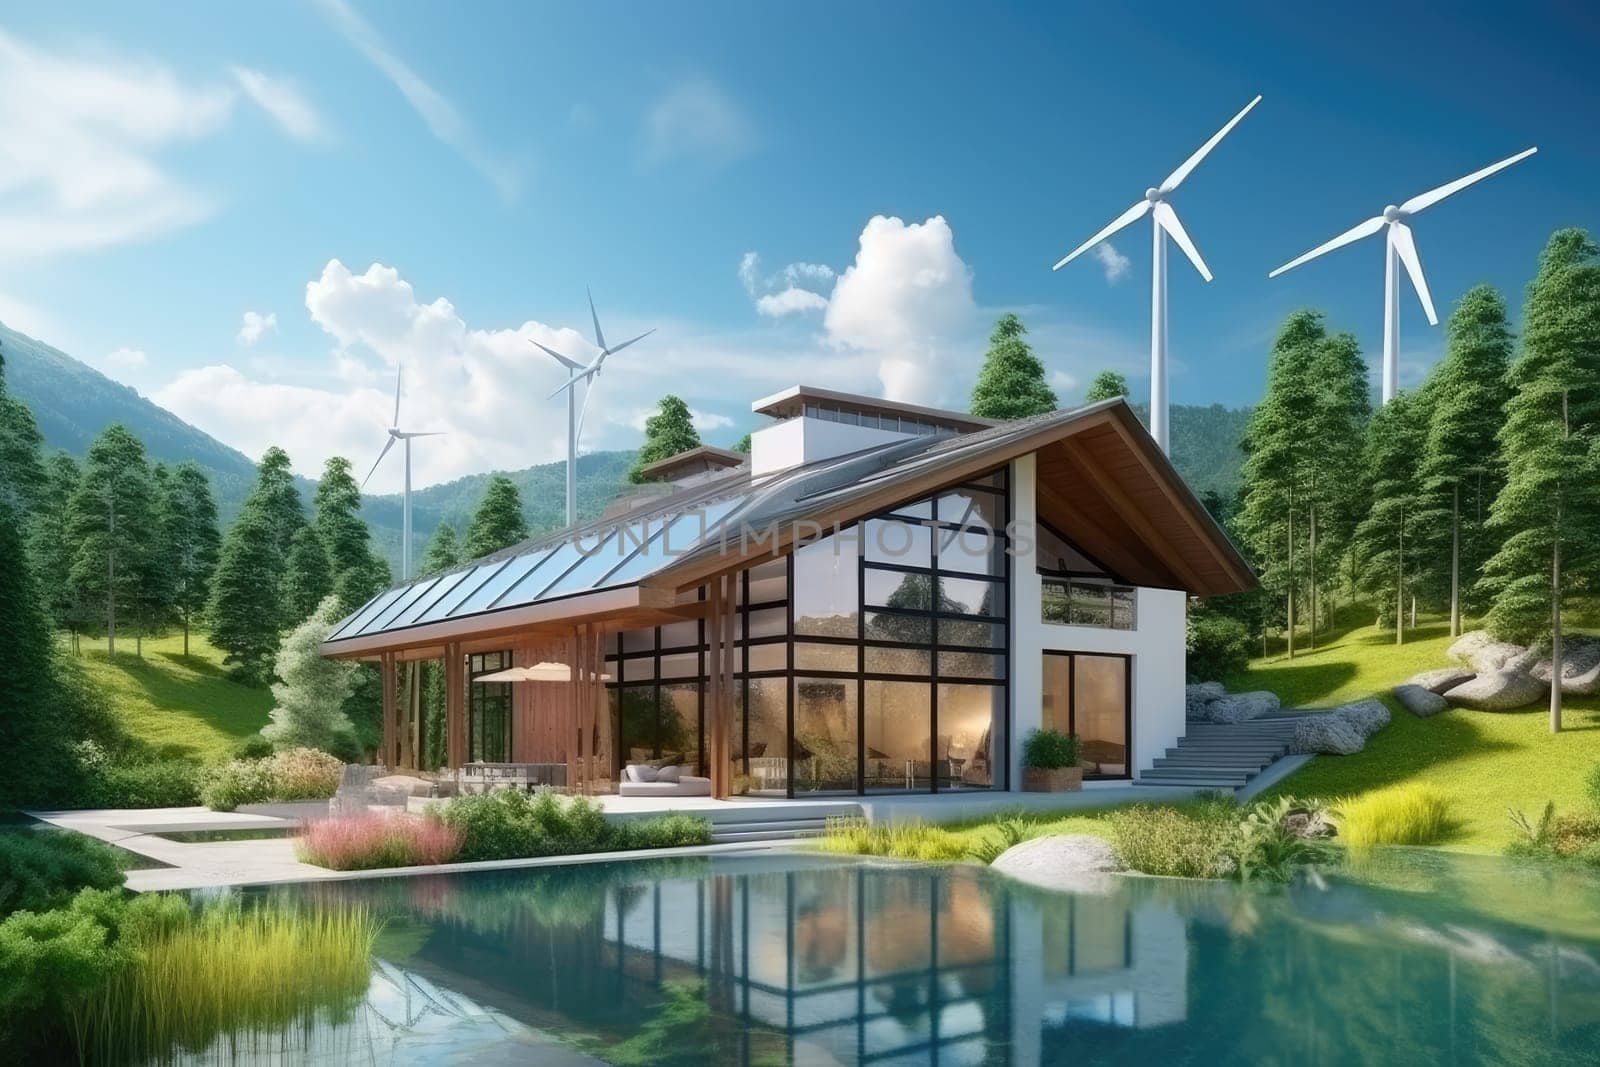 Ecological house or green building building surrounded by nature, with solar panels or wind turbines by Yurich32